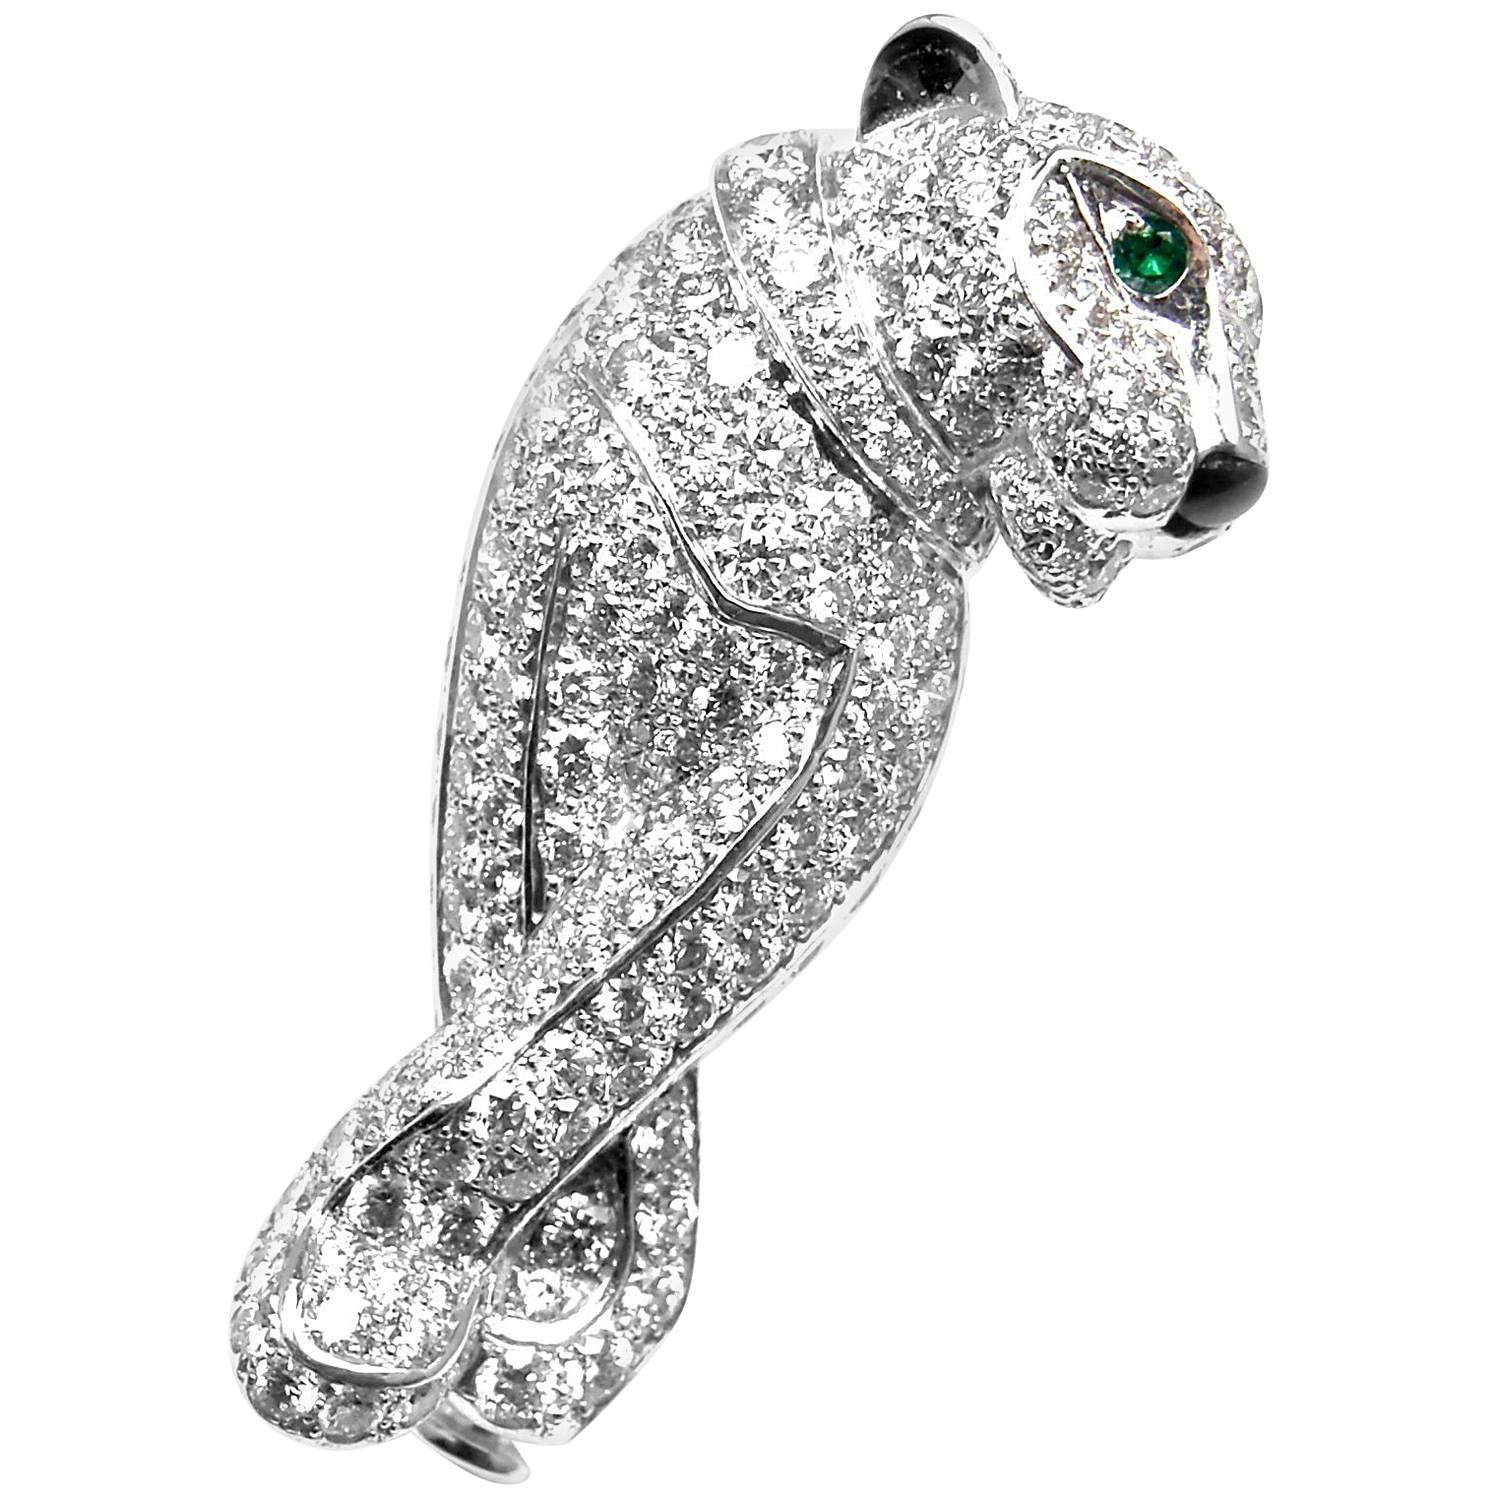 Cartier Panther Panthere Diamond Onyx Emerald White Gold Pin Brooch